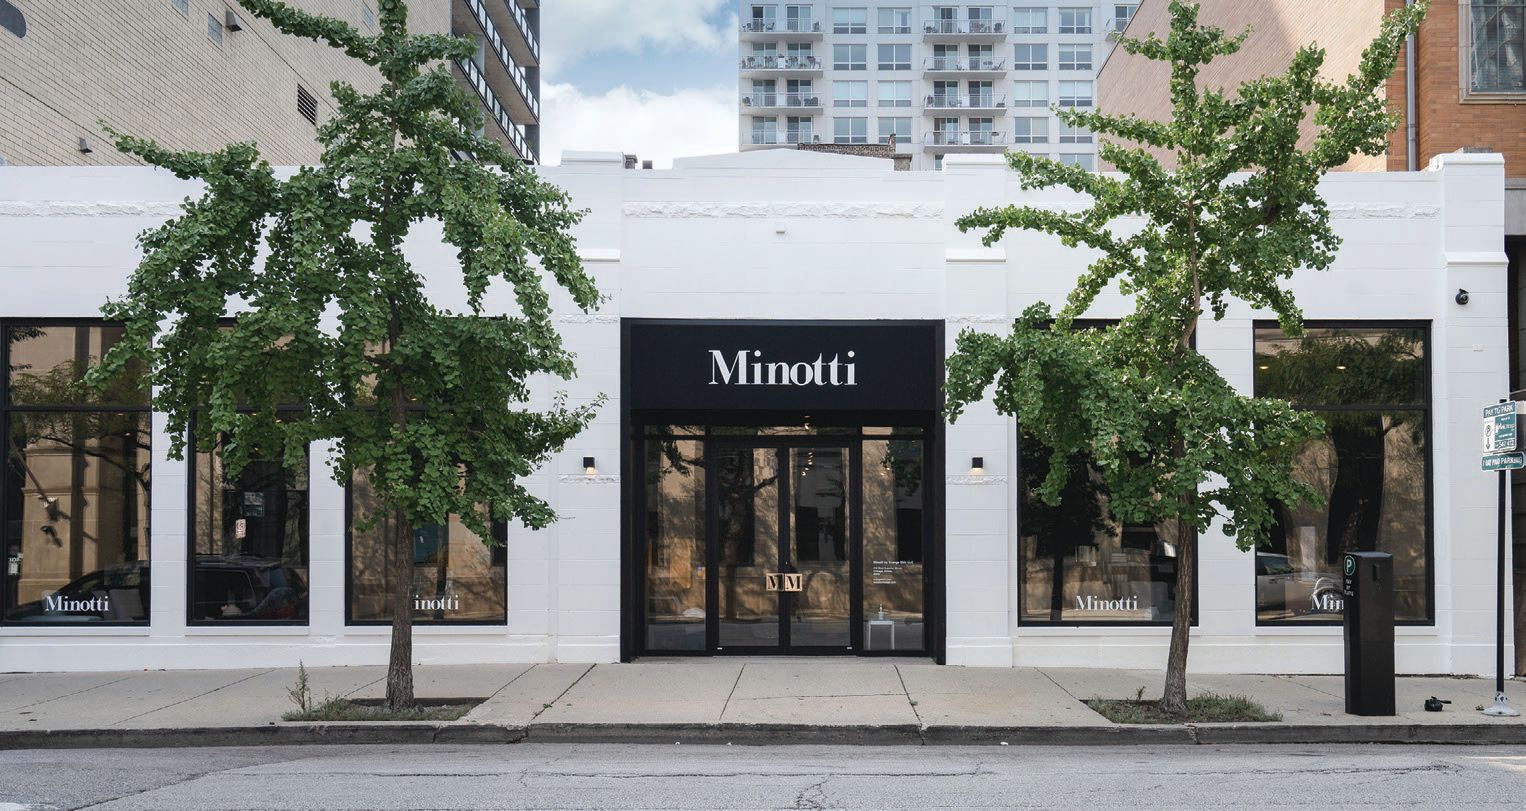 Minotti’s well-appointed exterior PHOTO BY: OBI UWAKWE/LC’OUP 